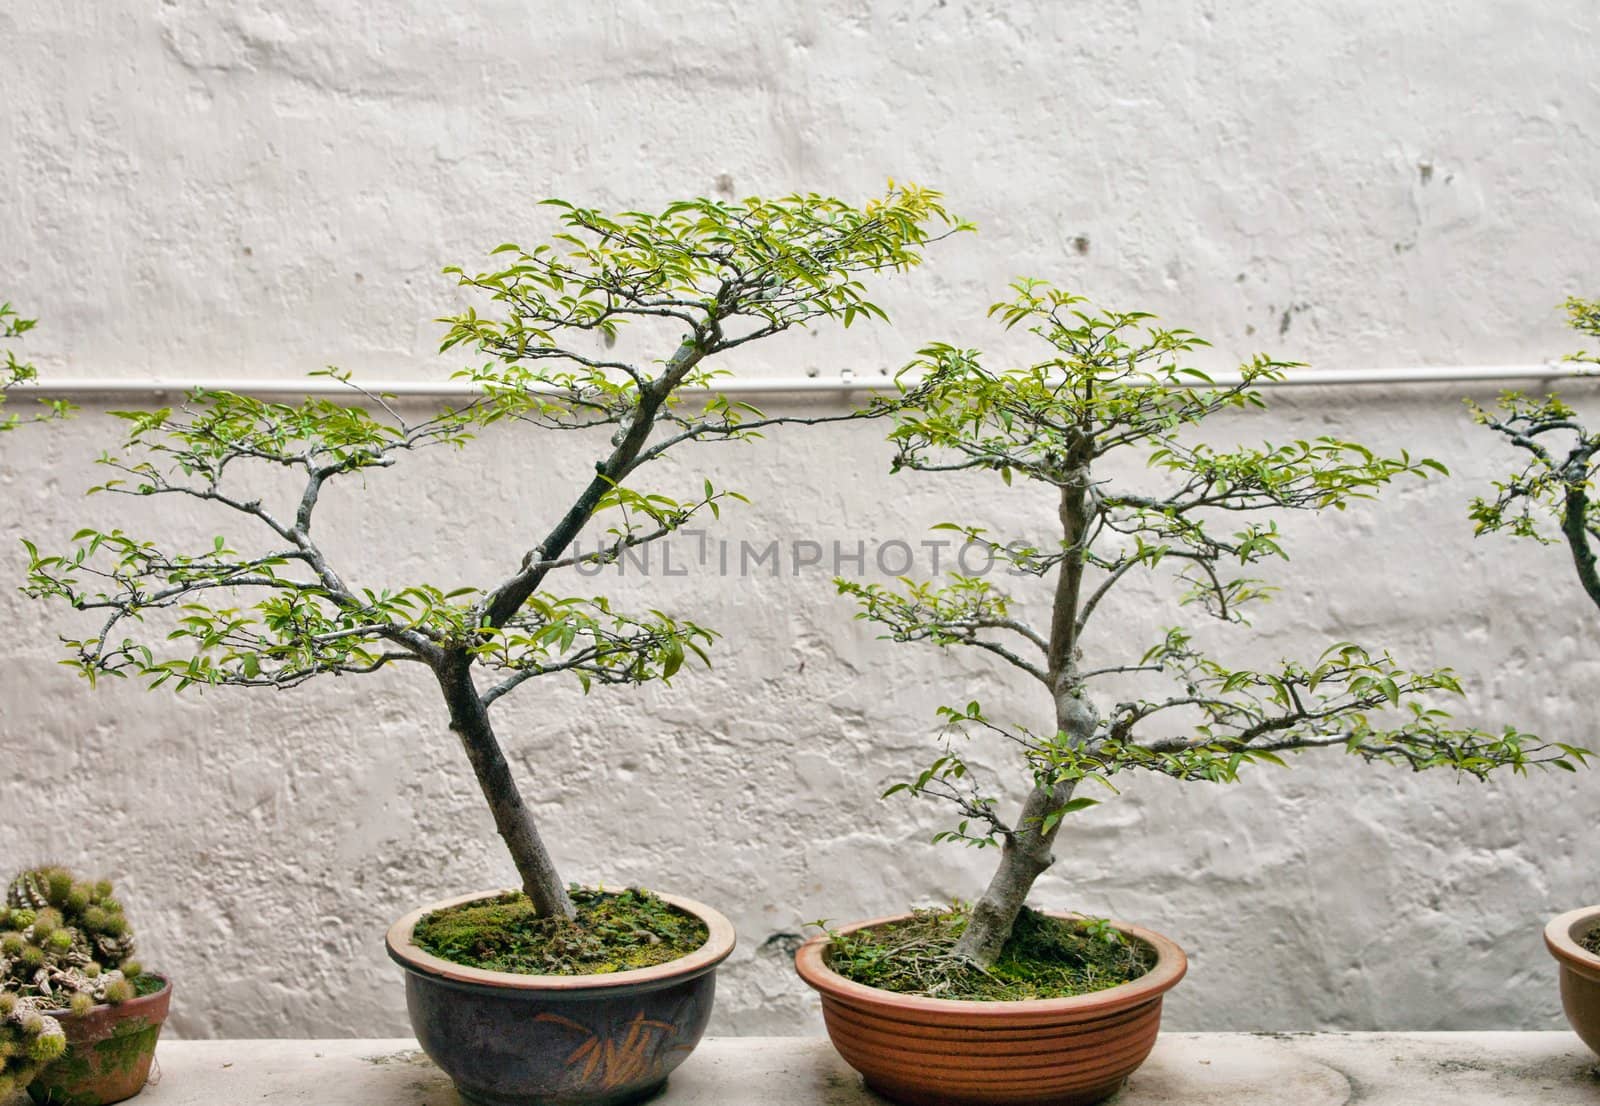 bonsai trees by clearviewstock